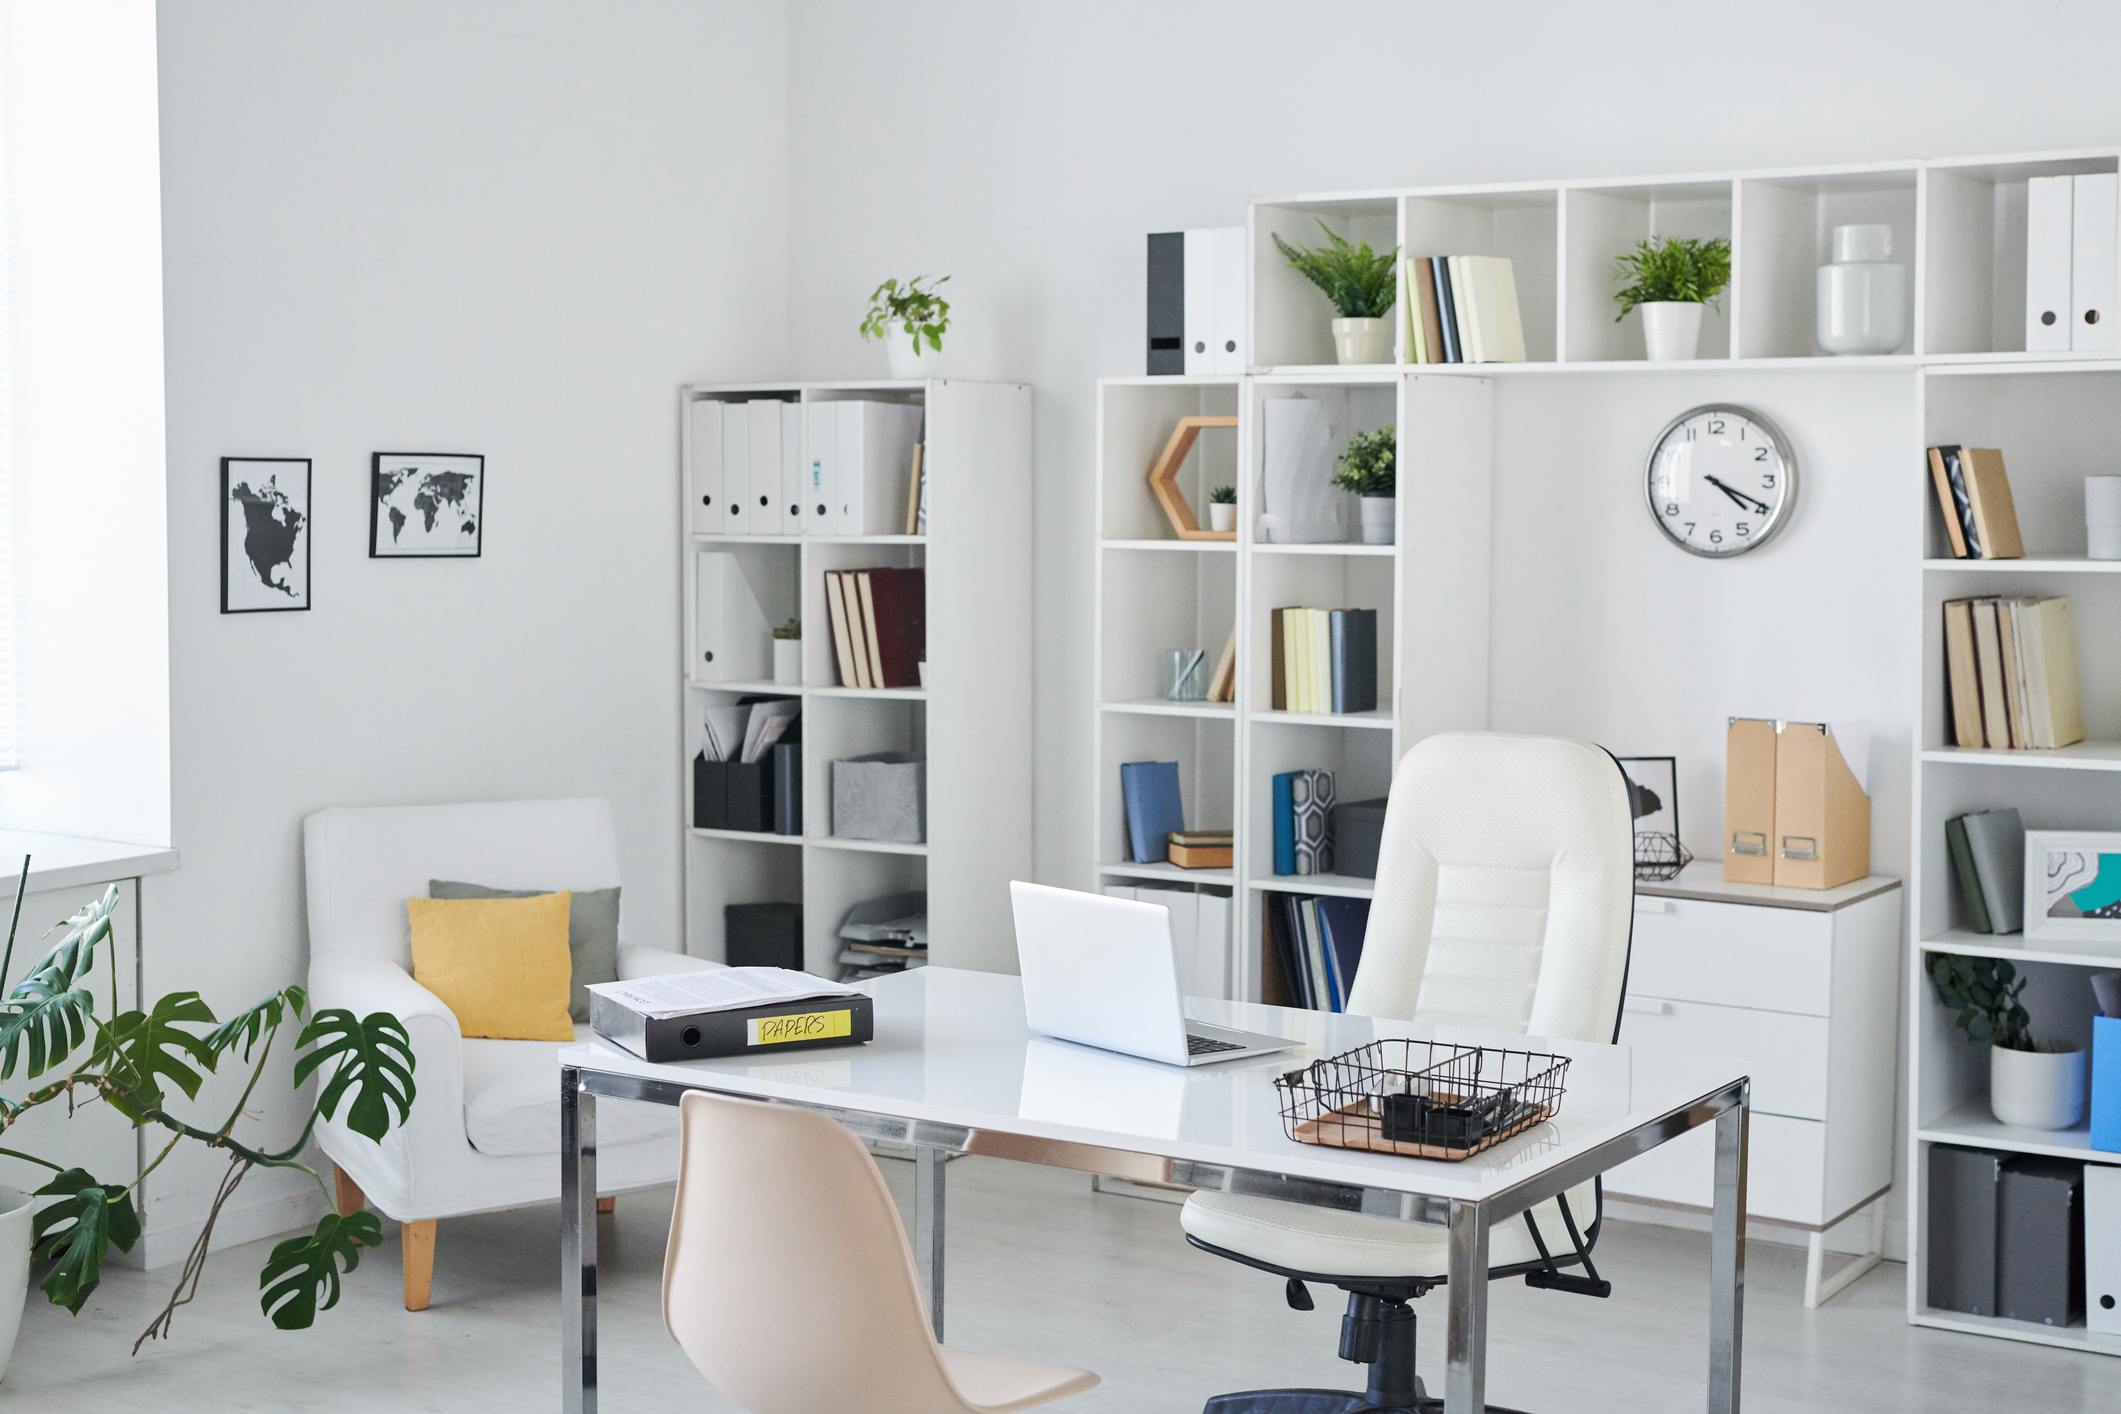 Professional home office with a desk, seating, shelves, and minimalistic decor.